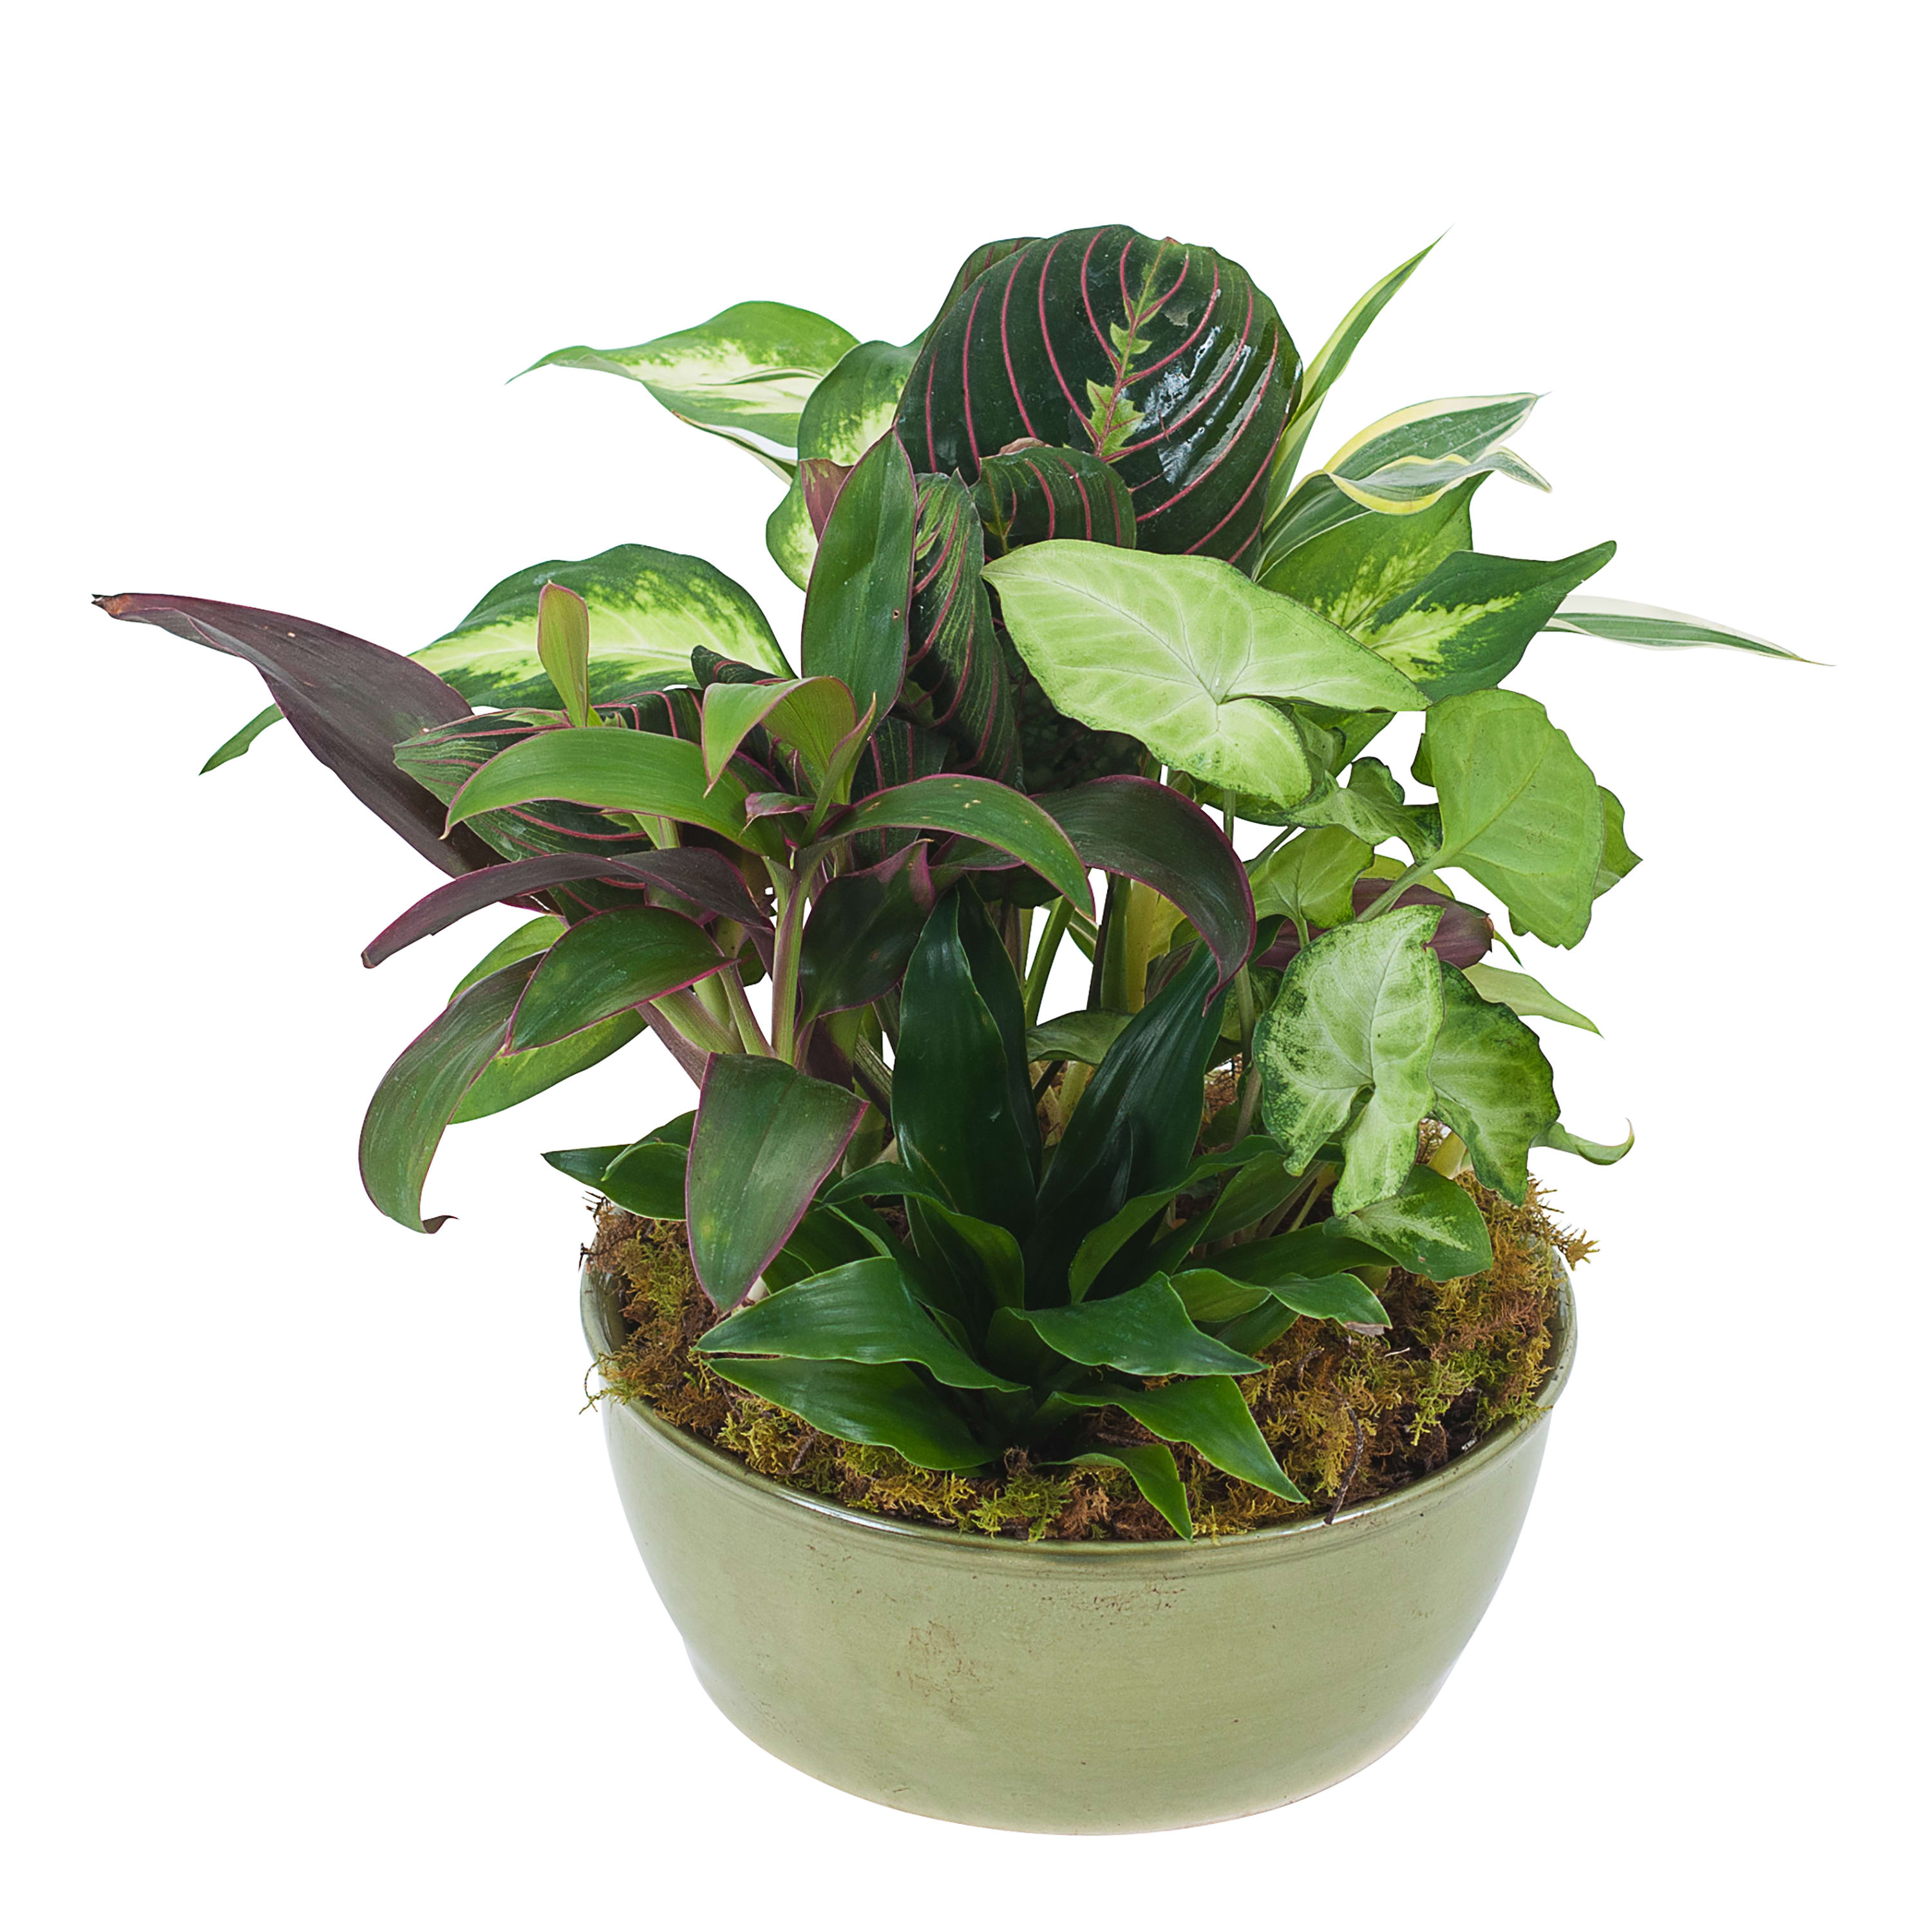 Small Dish Garden - A variety of green plants in a ceramic container.TMF-619